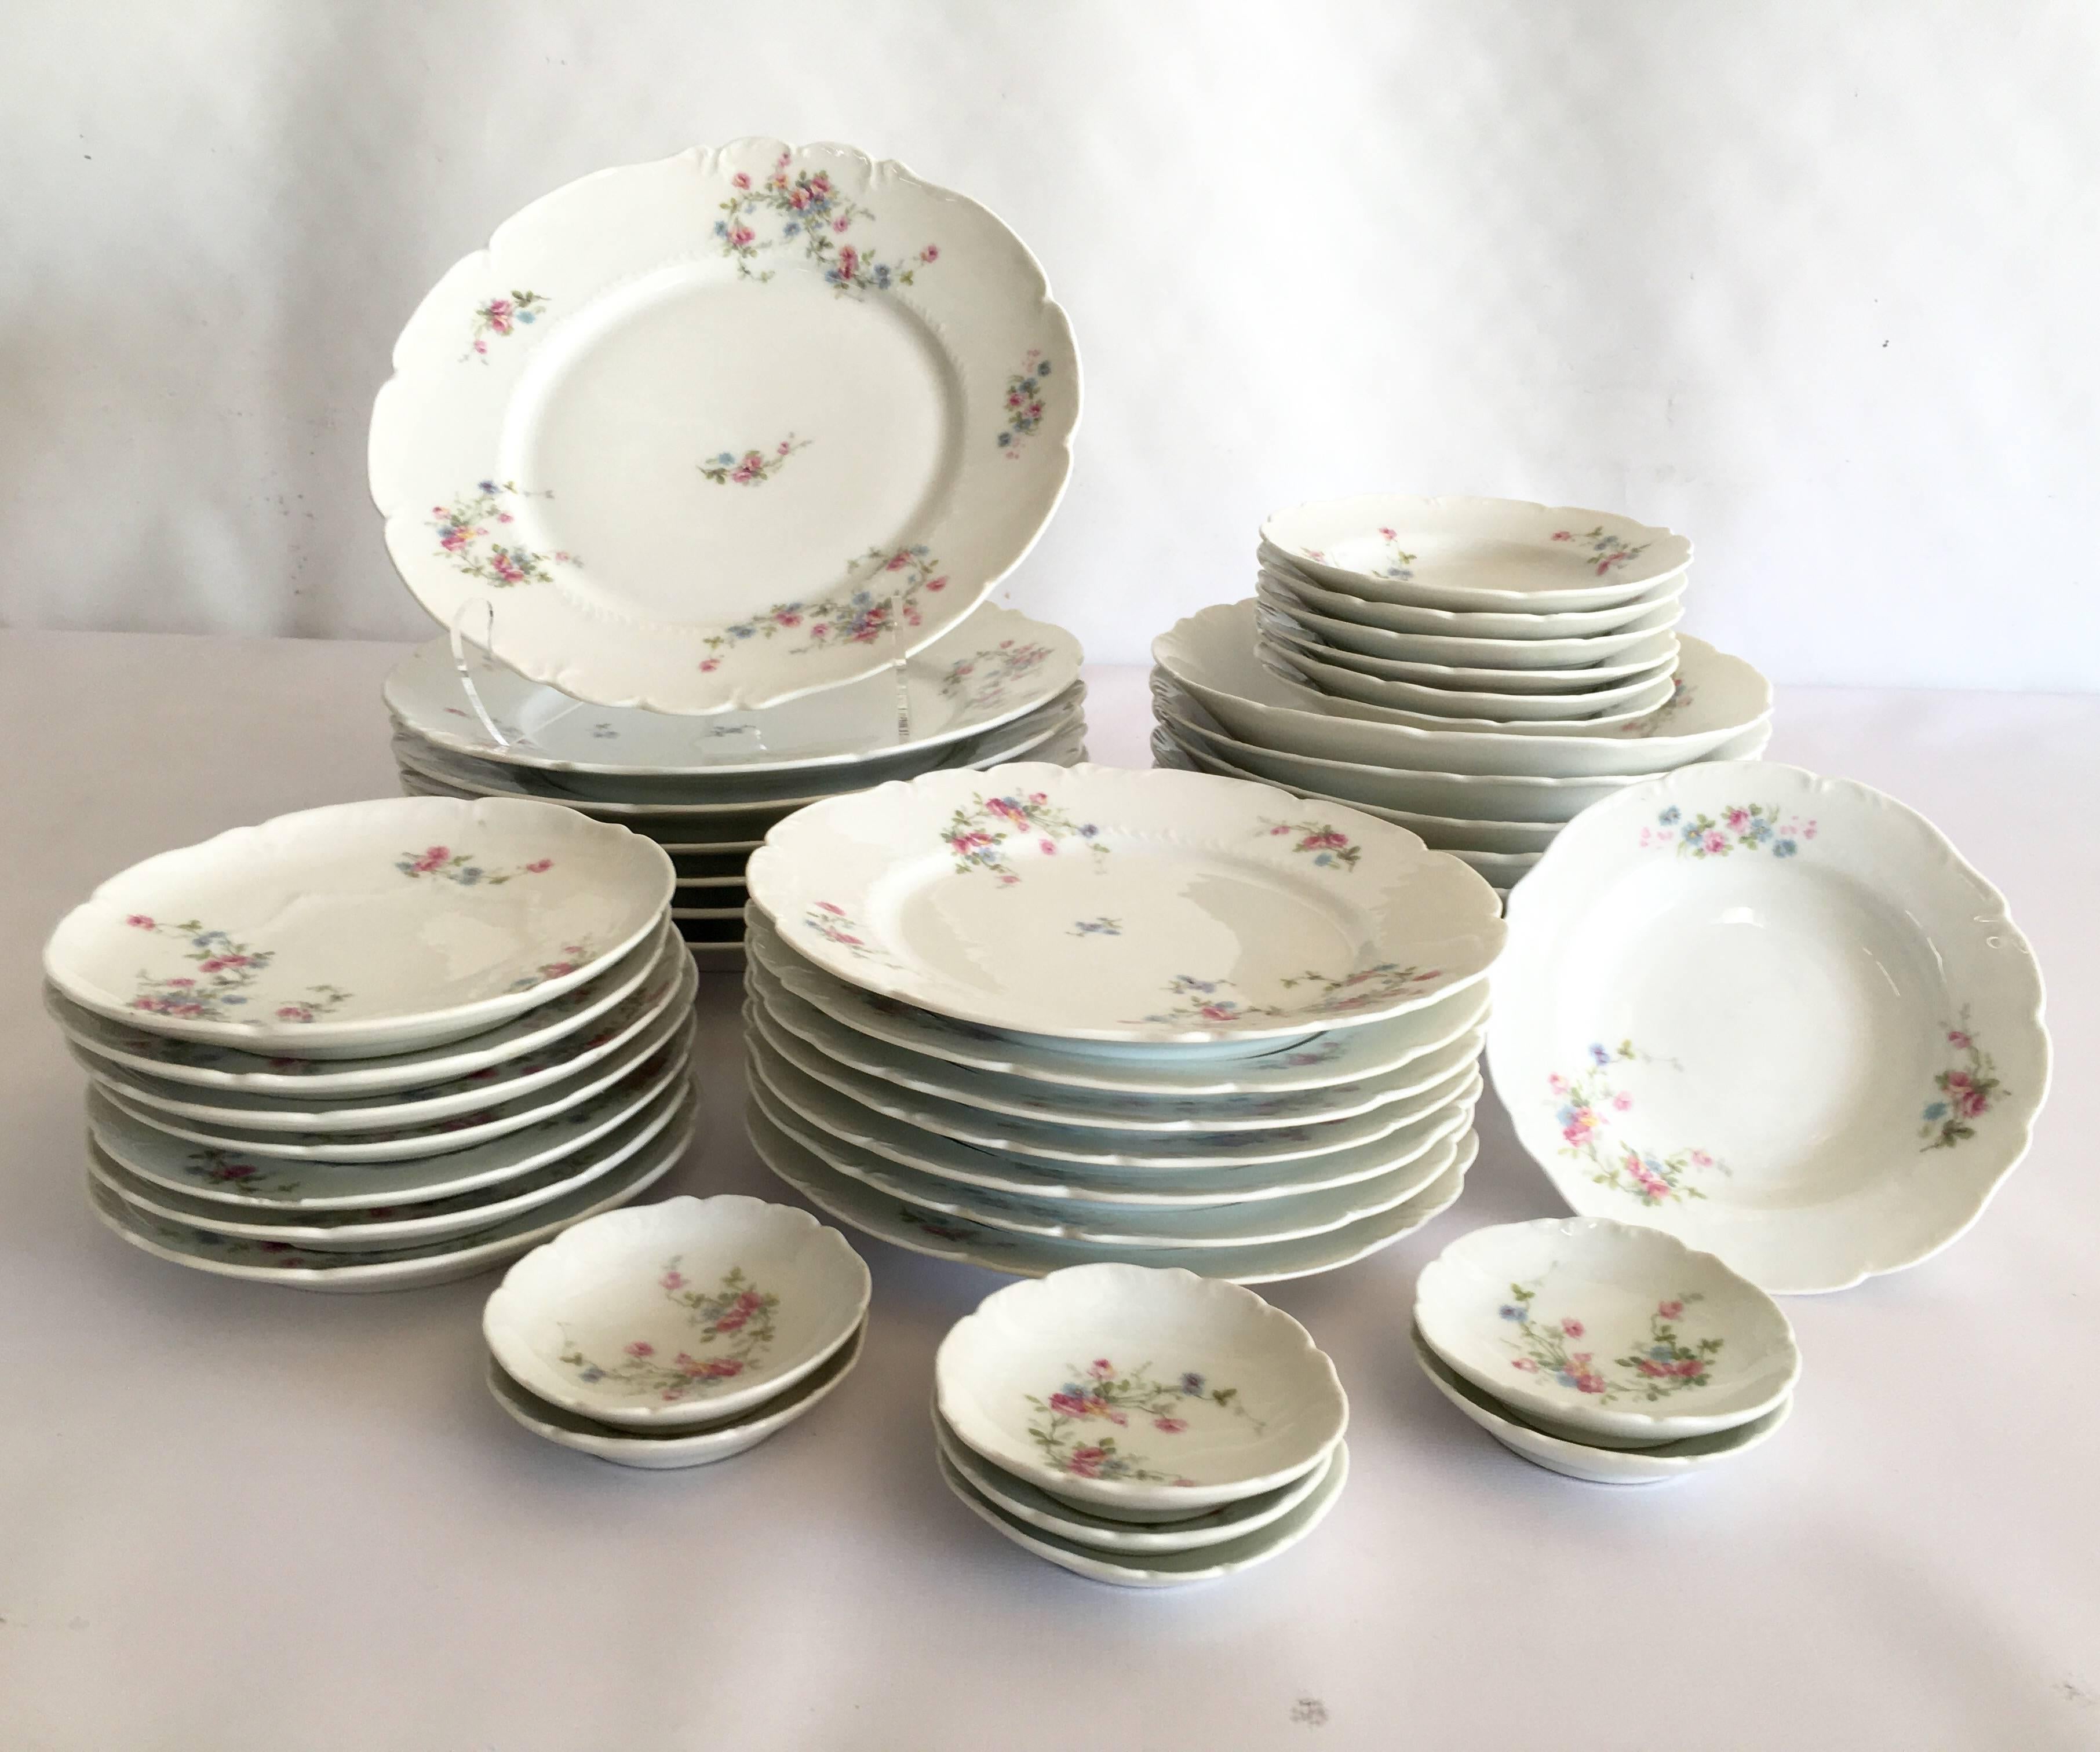 Rare 42 piece set of Early 20th Century L.R.L Limoges porcelain dinnerware Pattern features a white ground with pink, green and violet roses and a  scalloped edge. Set includes seven six piece place settings of  dinner plates, salad/dessert plates,